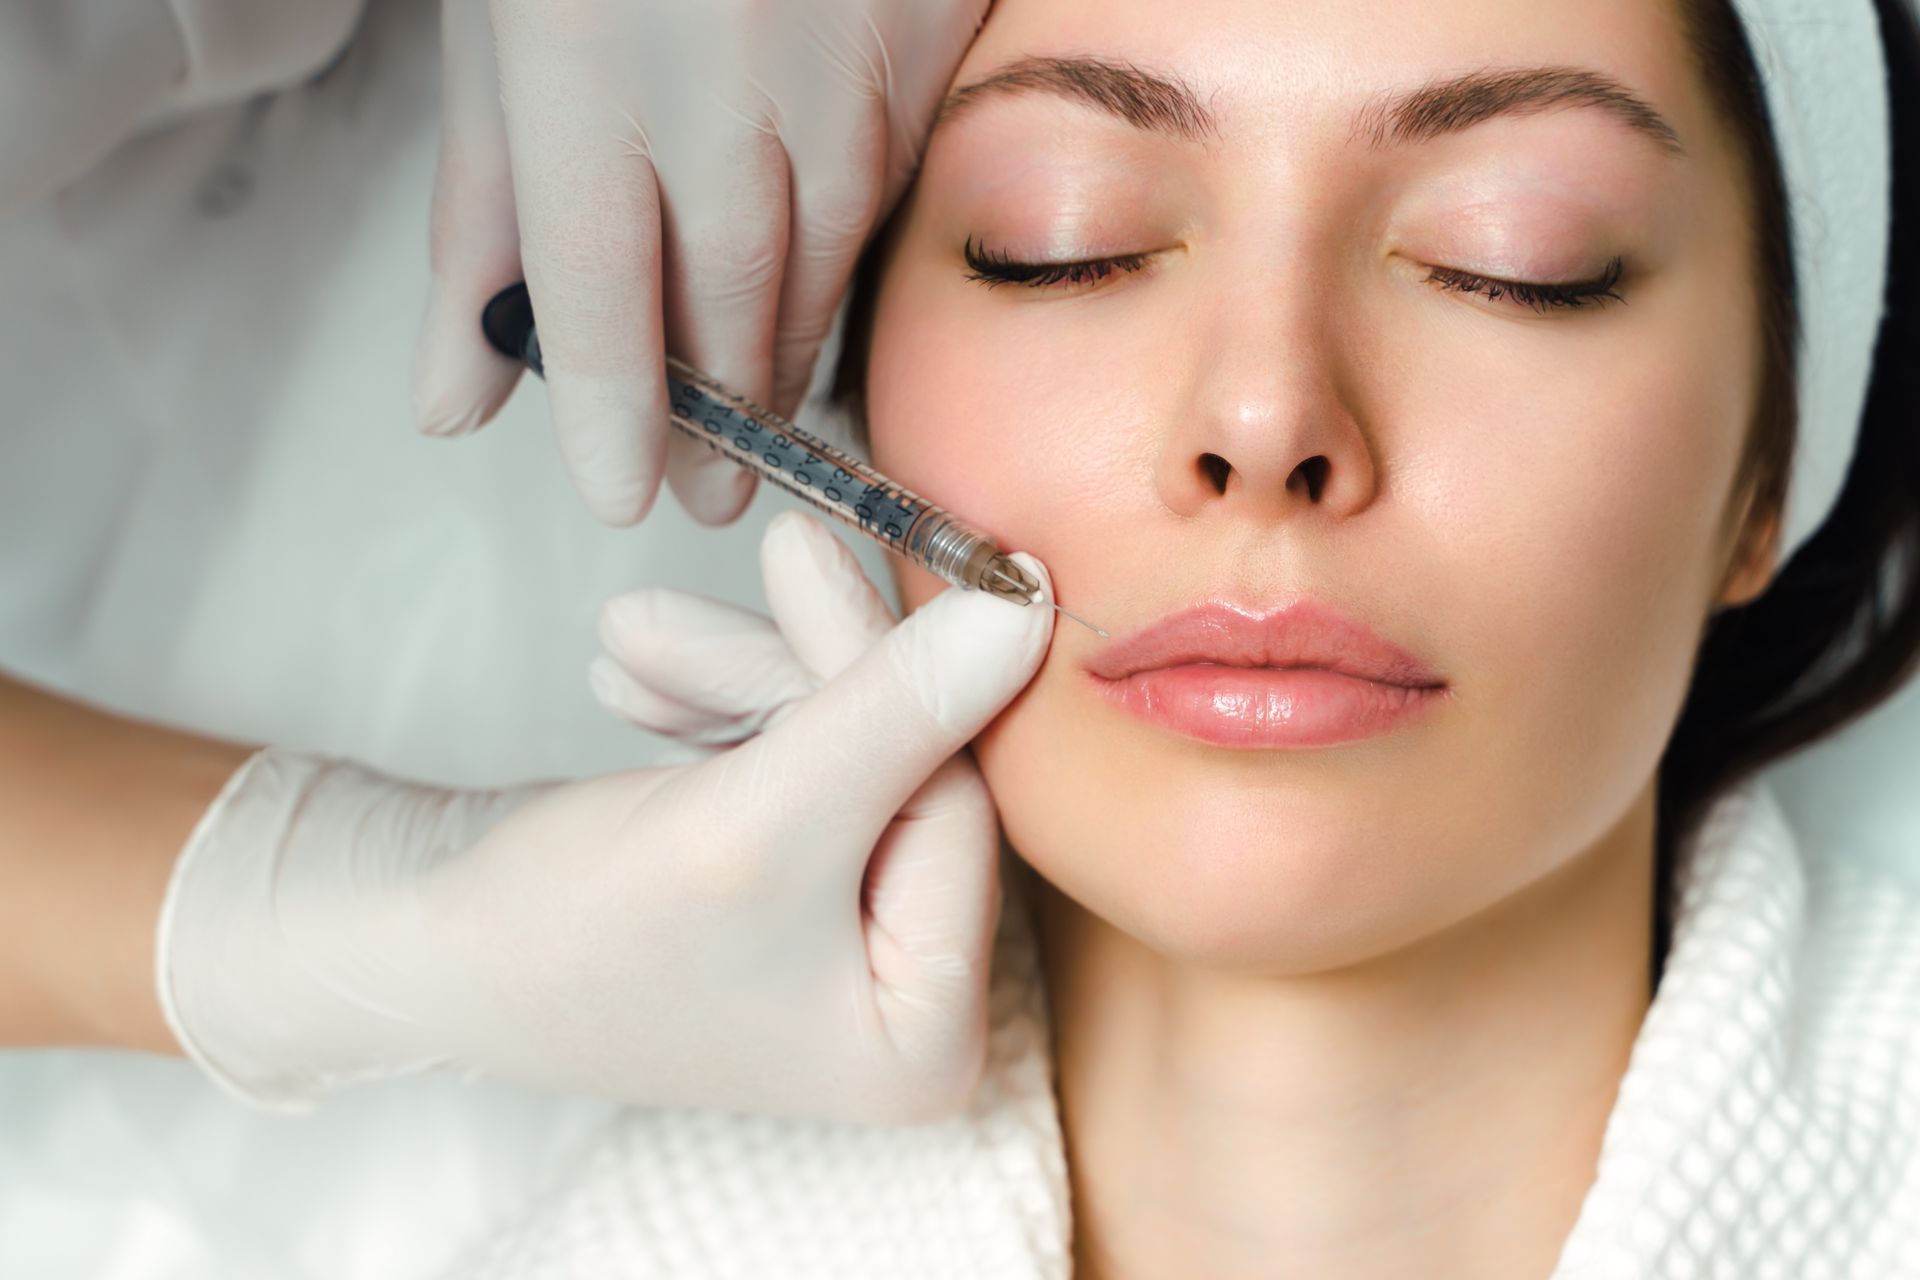 a woman is getting a botox injection in her lip